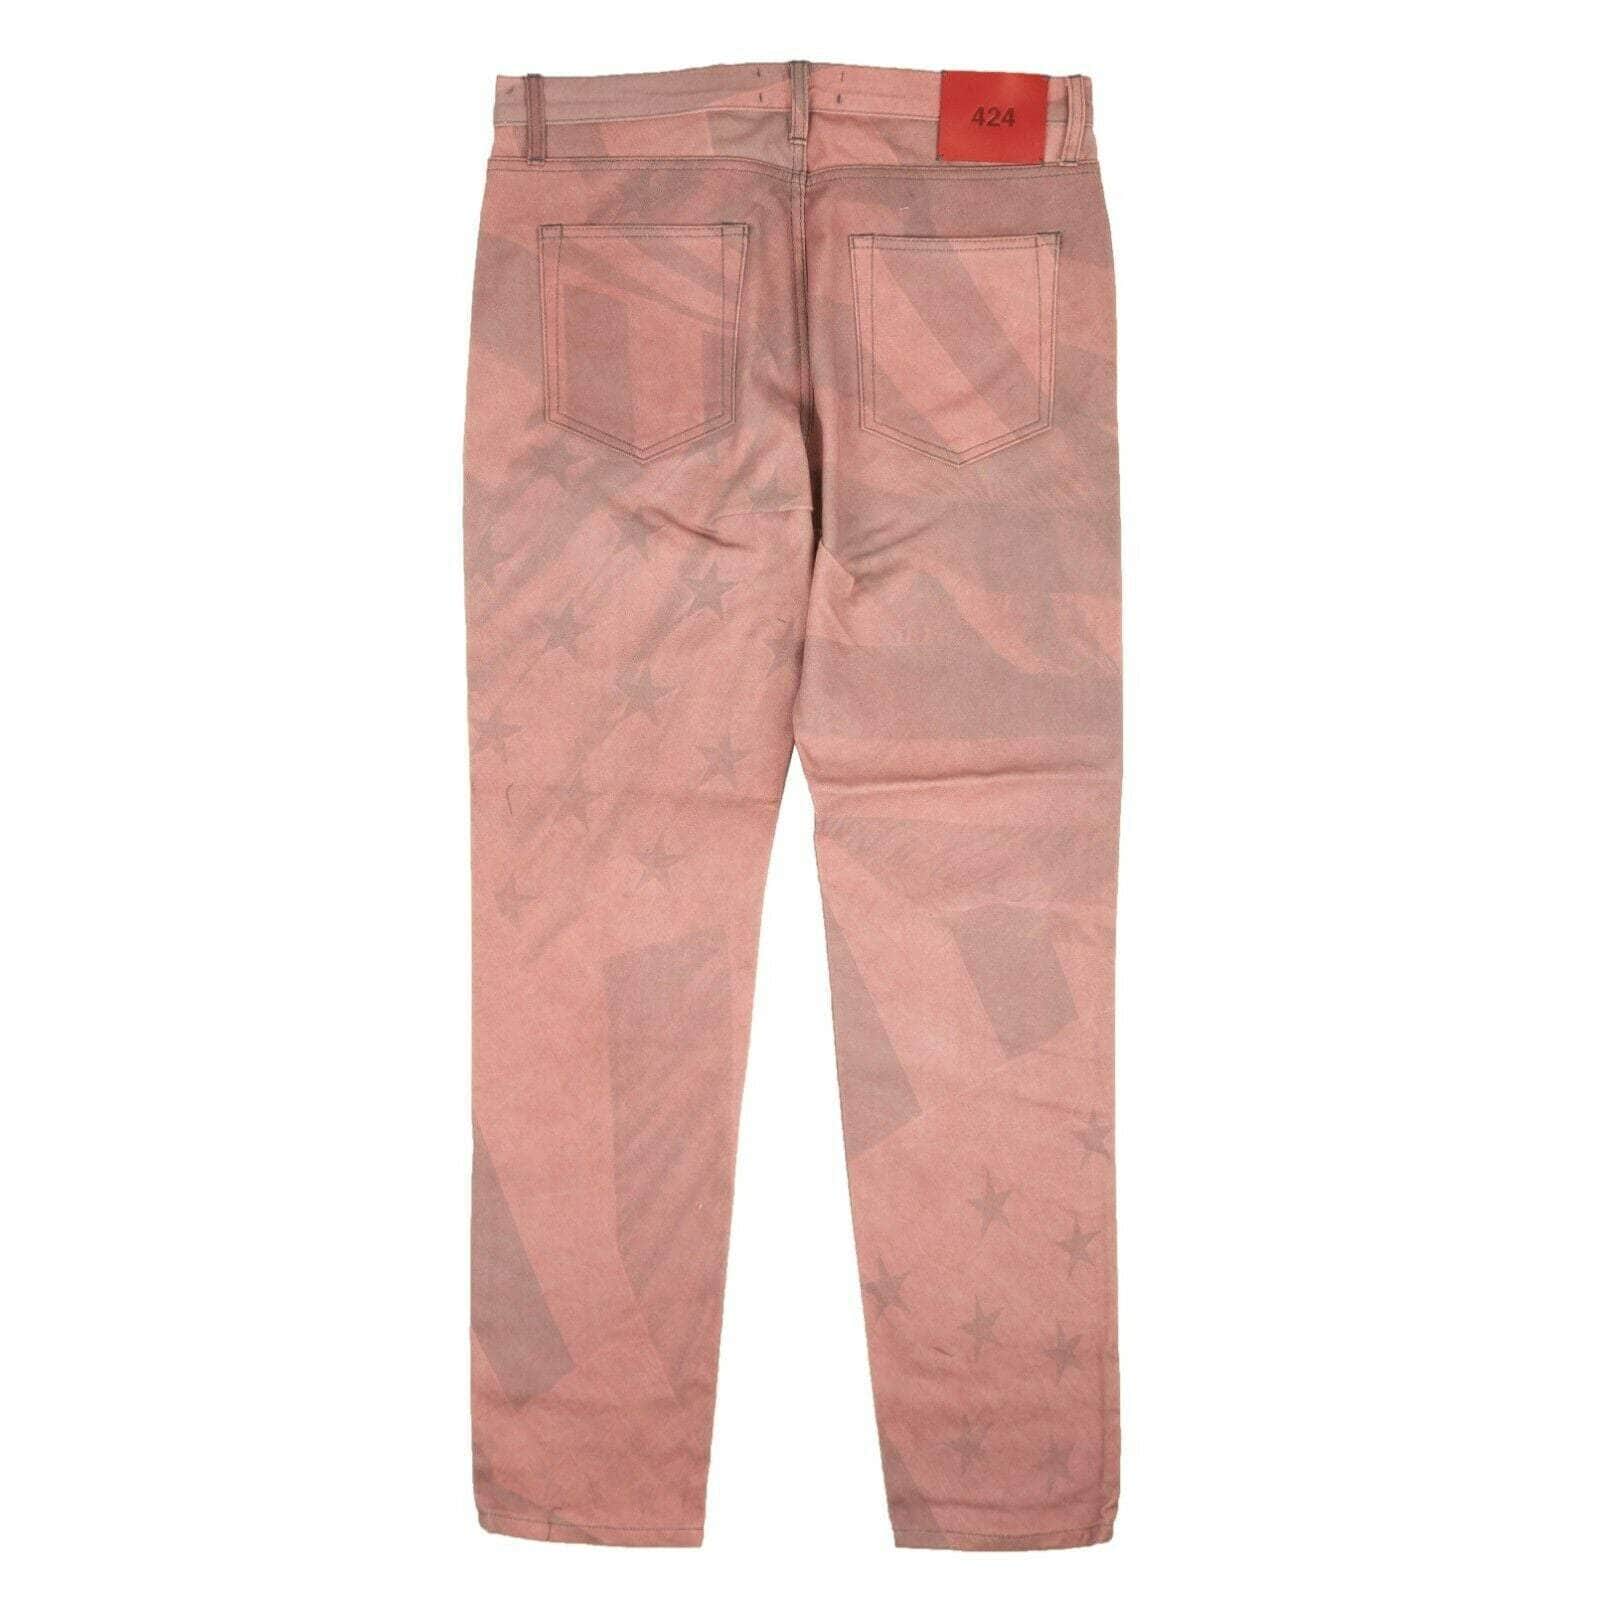 424 ON FAIRFAX 30 Red And Gray All Over Flag Print Denim Jeans 95-424-1036/30 95-424-1036/30